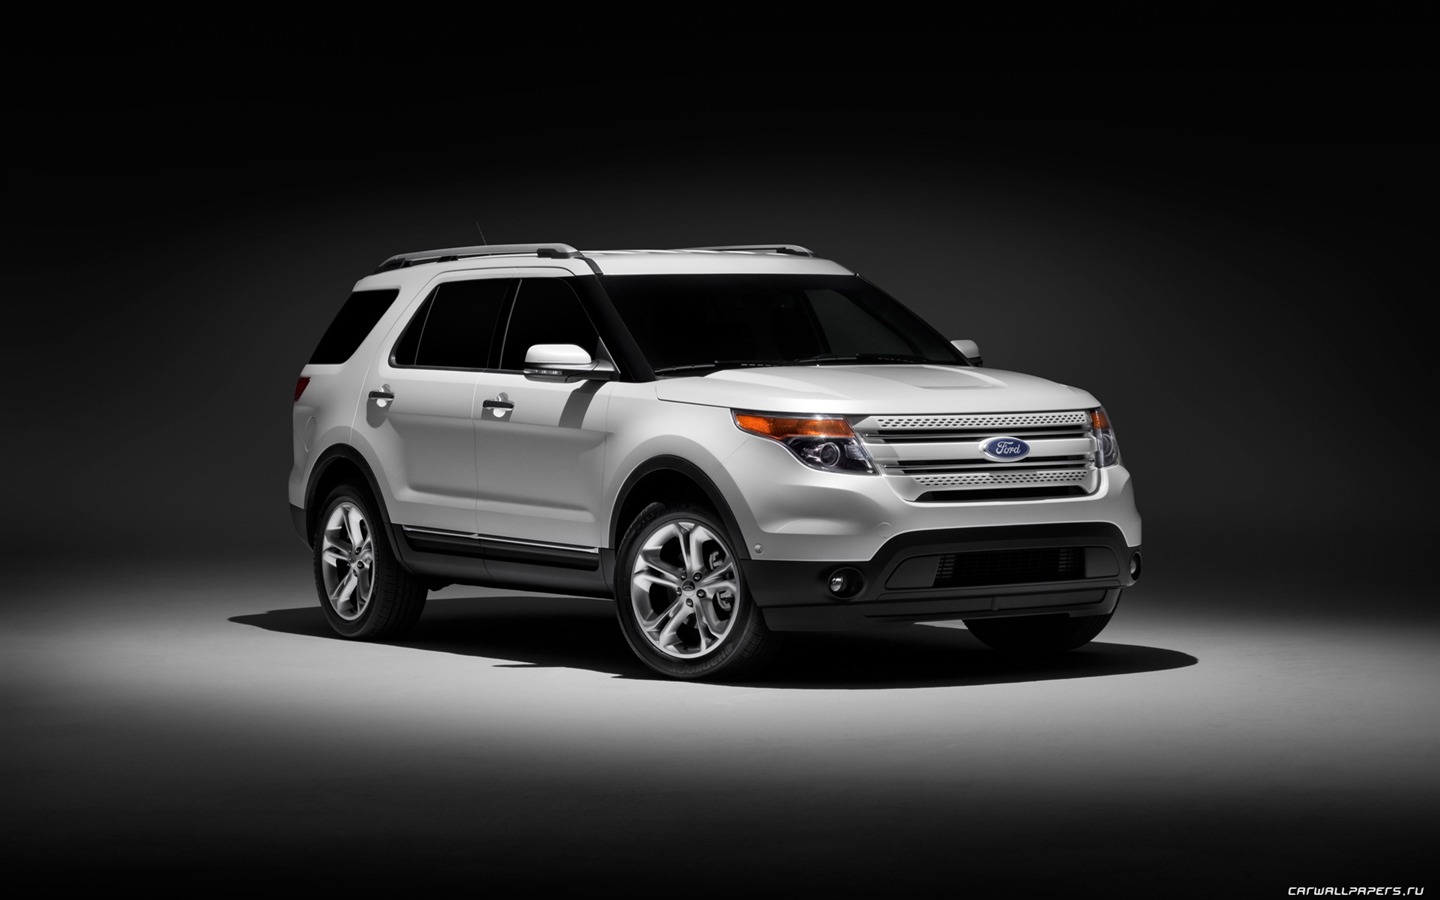 Ford Explorer Limited - 2011 福特22 - 1440x900